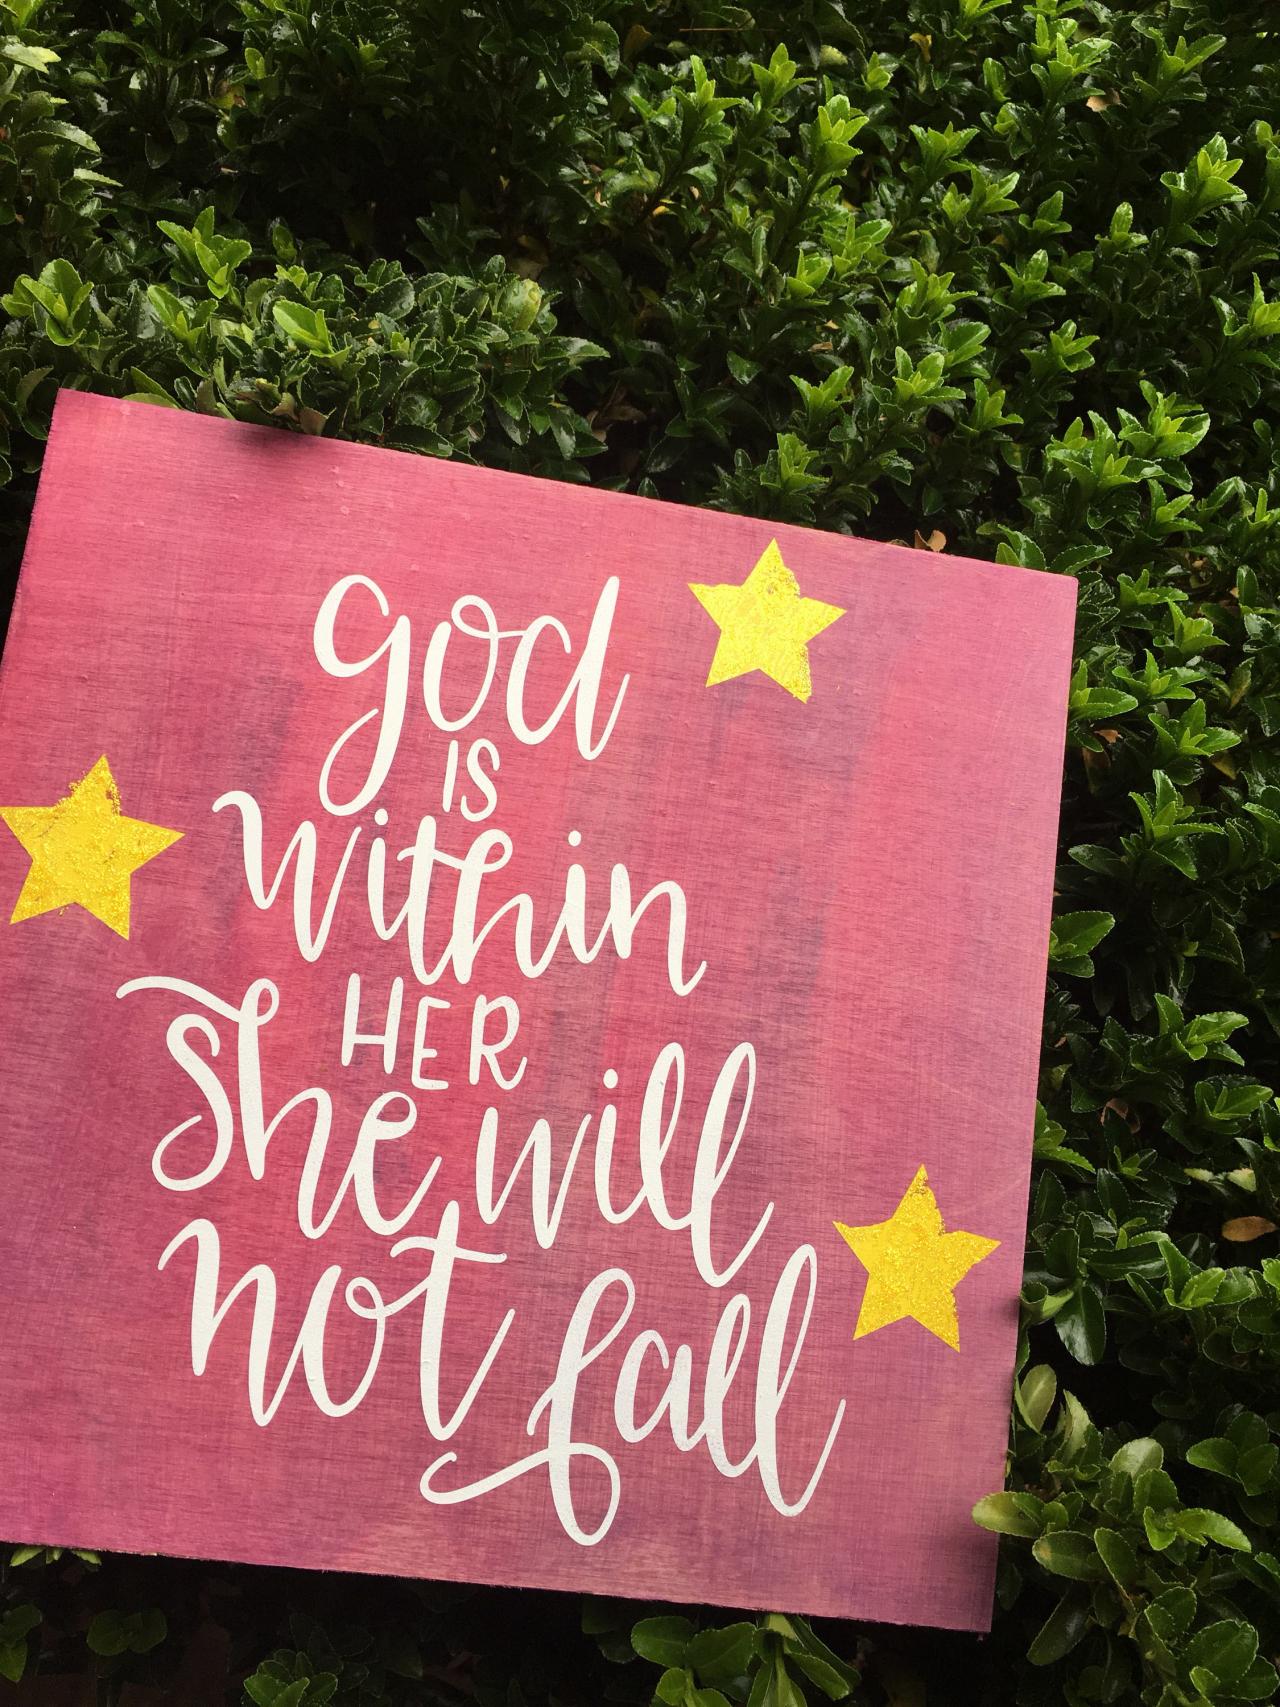 God Is Within Her, She Will Not Fall. Stained And Hand Painted Wood Sign- 12x12